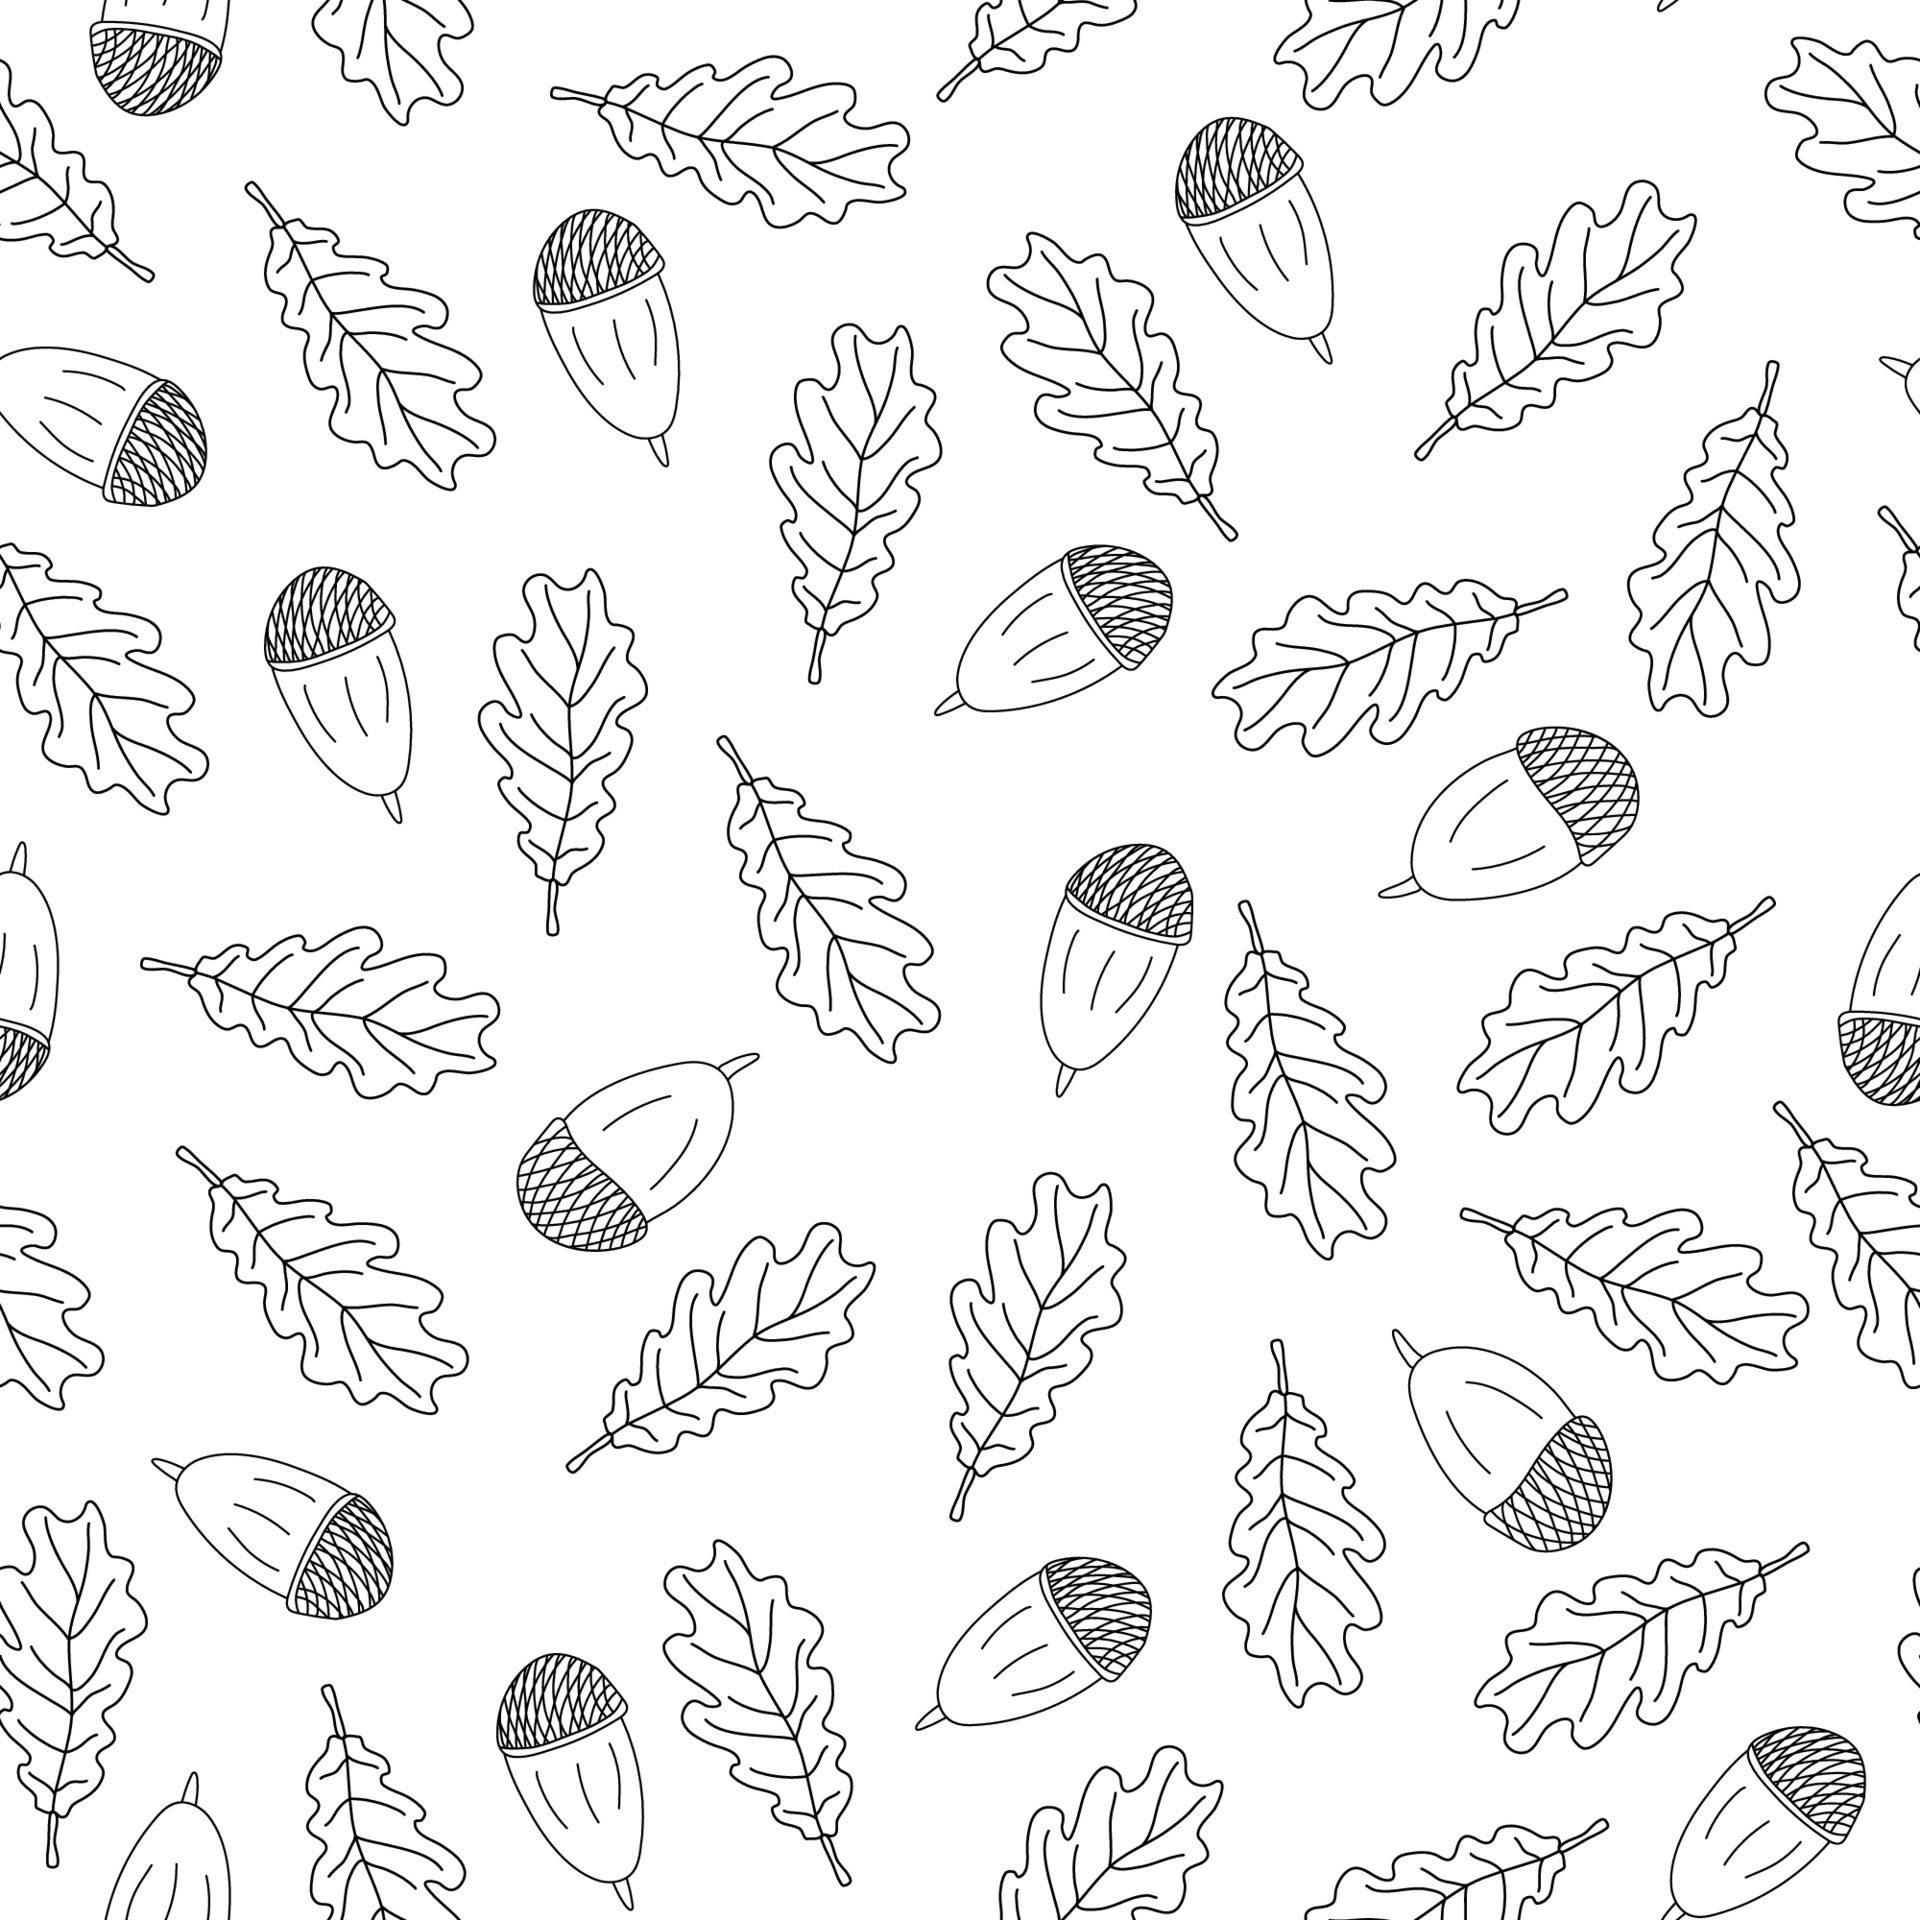 Autumn seamless pattern with oak leaves and acorns on white background. Great for fabrics, wrapping papers, wallpaper, covers. Doodle sketch style illustration in black ink